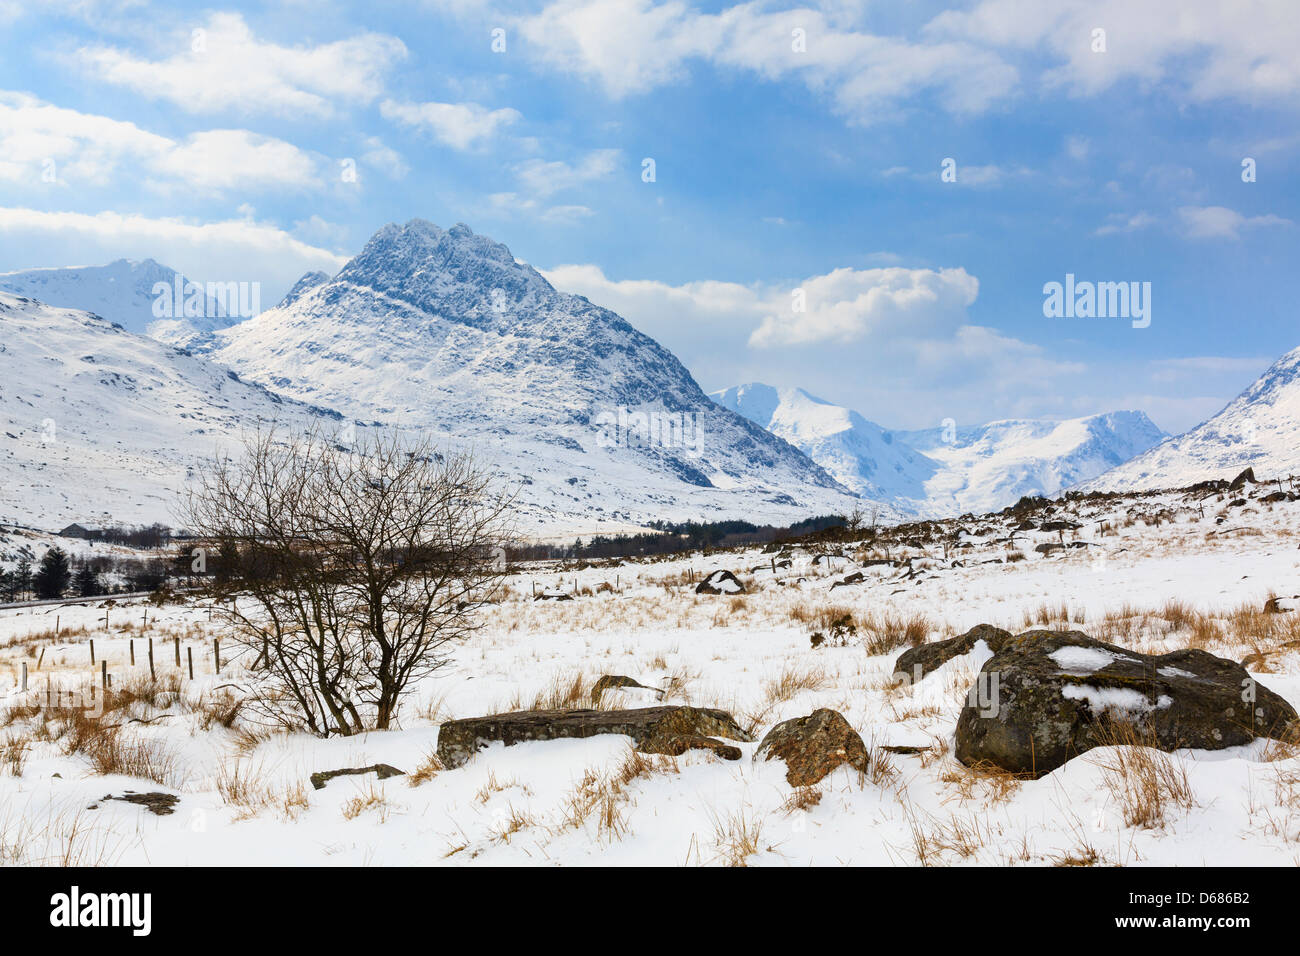 View to Mount Tryfan mountain east face with late snow in spring 2013 Snowdonia National Park, Ogwen Valley, Conwy, North Wales, UK Stock Photo